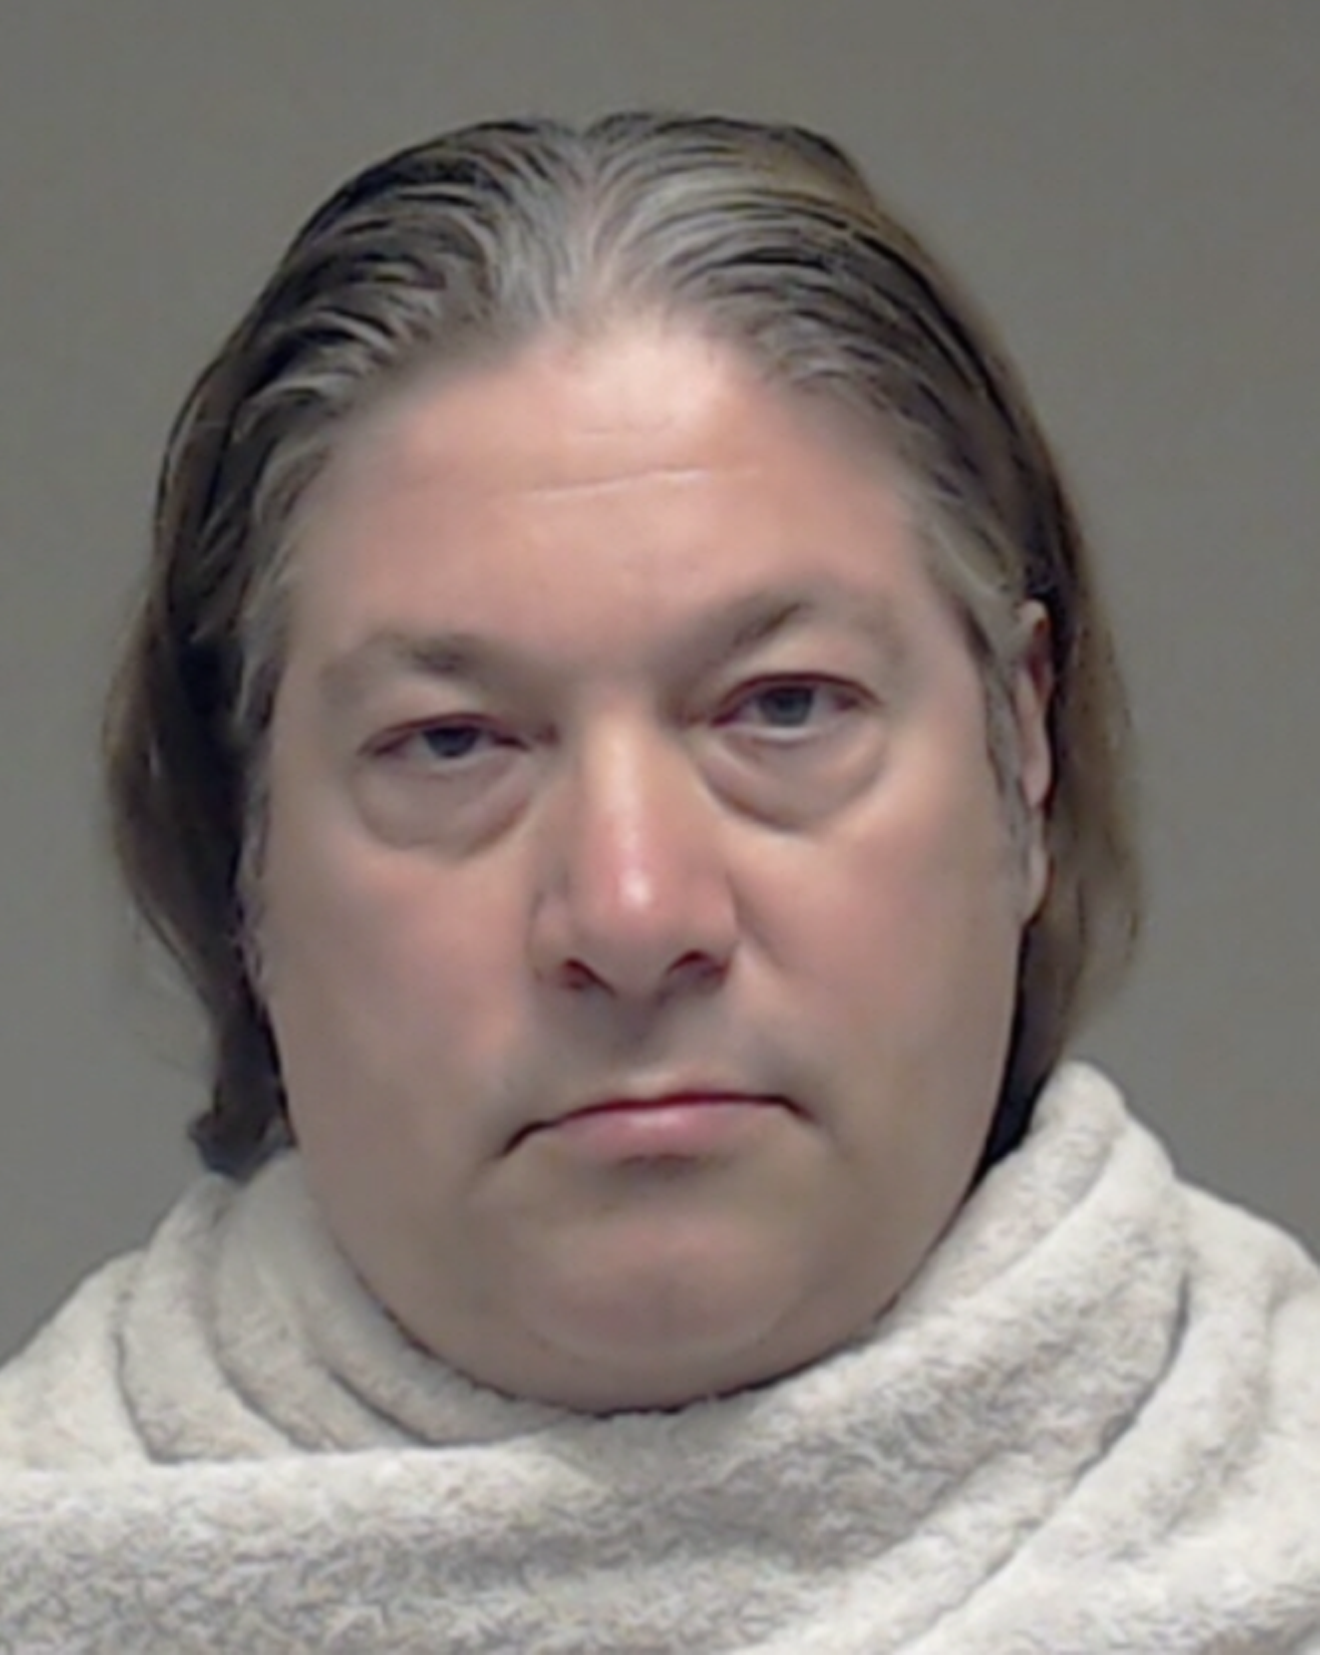 Gabe Reed, 46, was booked into Collin County Jail on April 30.